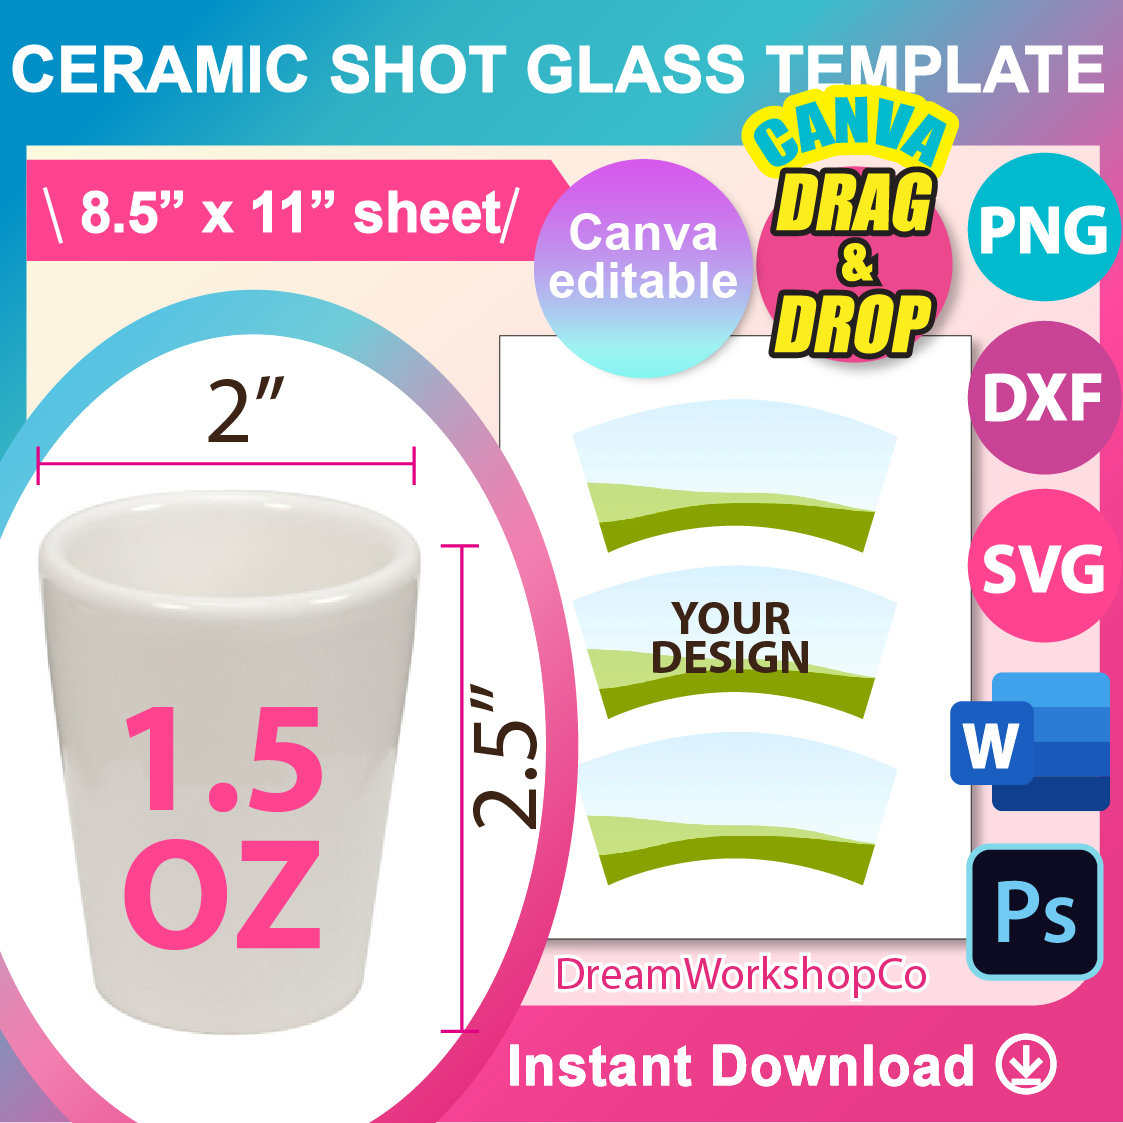 1.5oz Shot Glass Template, Sublimation, Ms Word, Canva, PSD, PNG, SVG, Dxf,  8.5x11 Sheet, Printable, Instant Download D753 